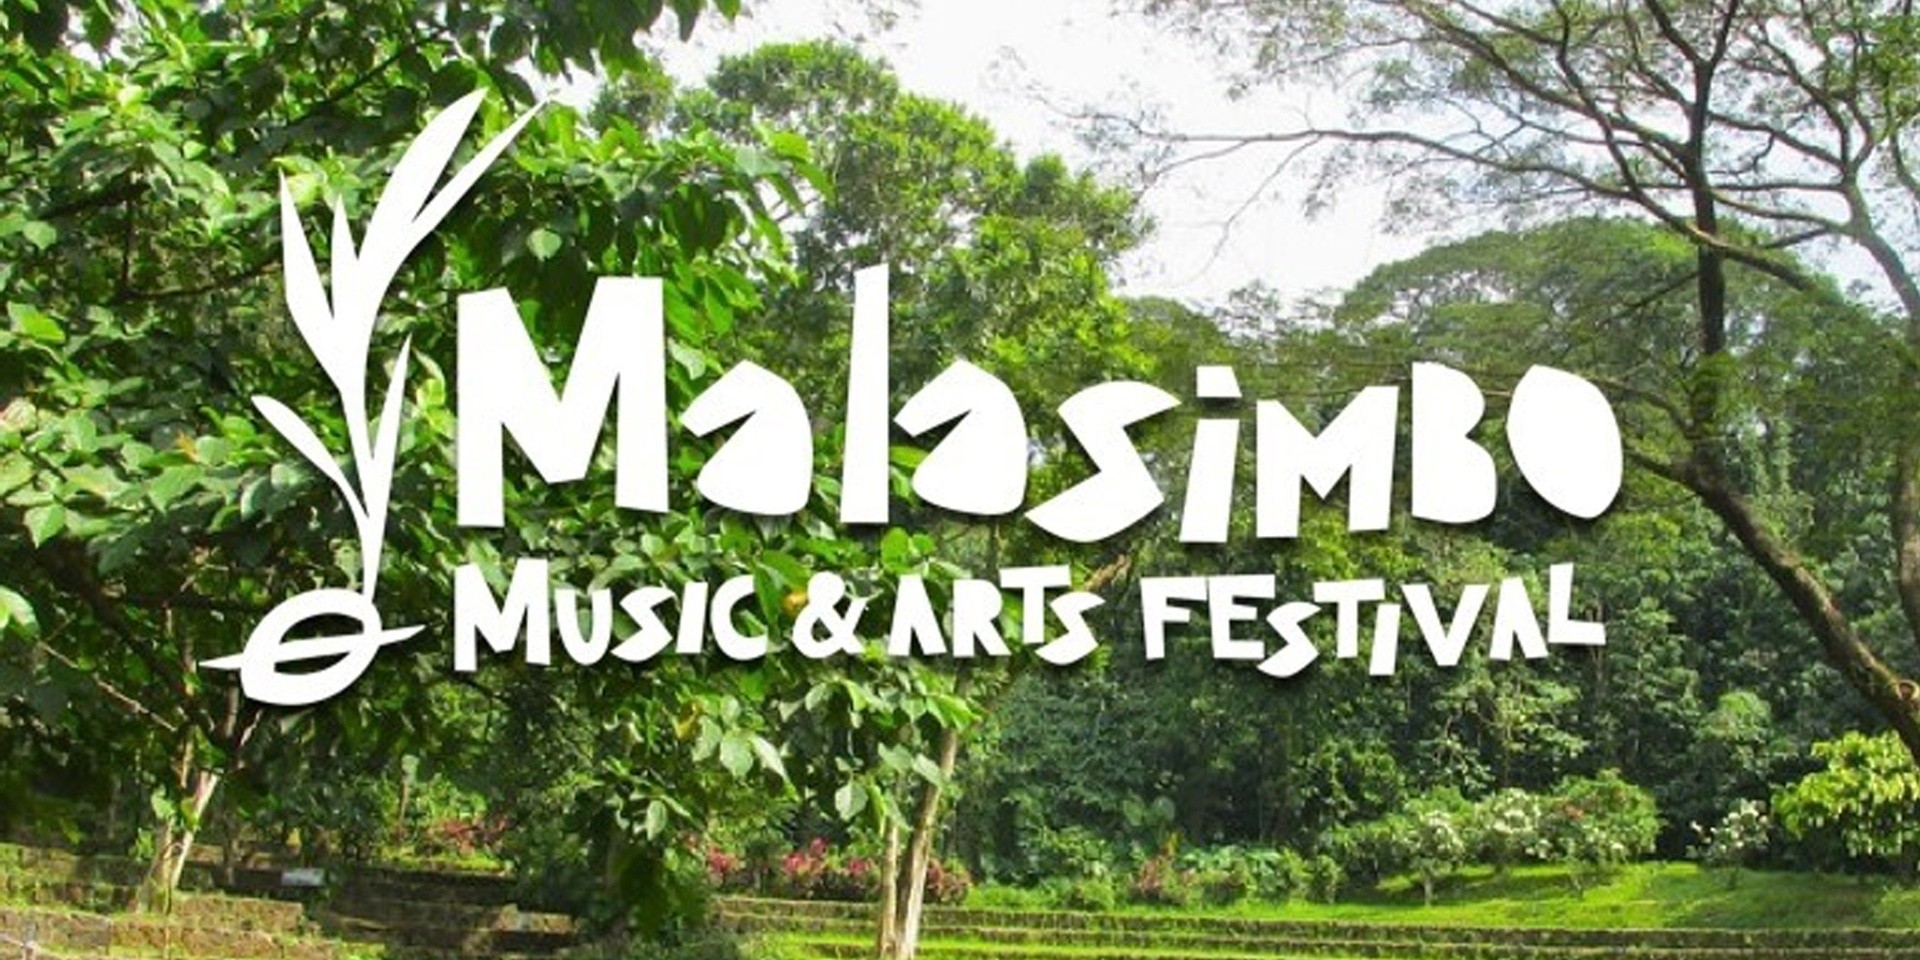 Mike Love, Jesús Molina, Uncomfortable Science, and more to perform at Malasimbo Music & Arts Festival 2020